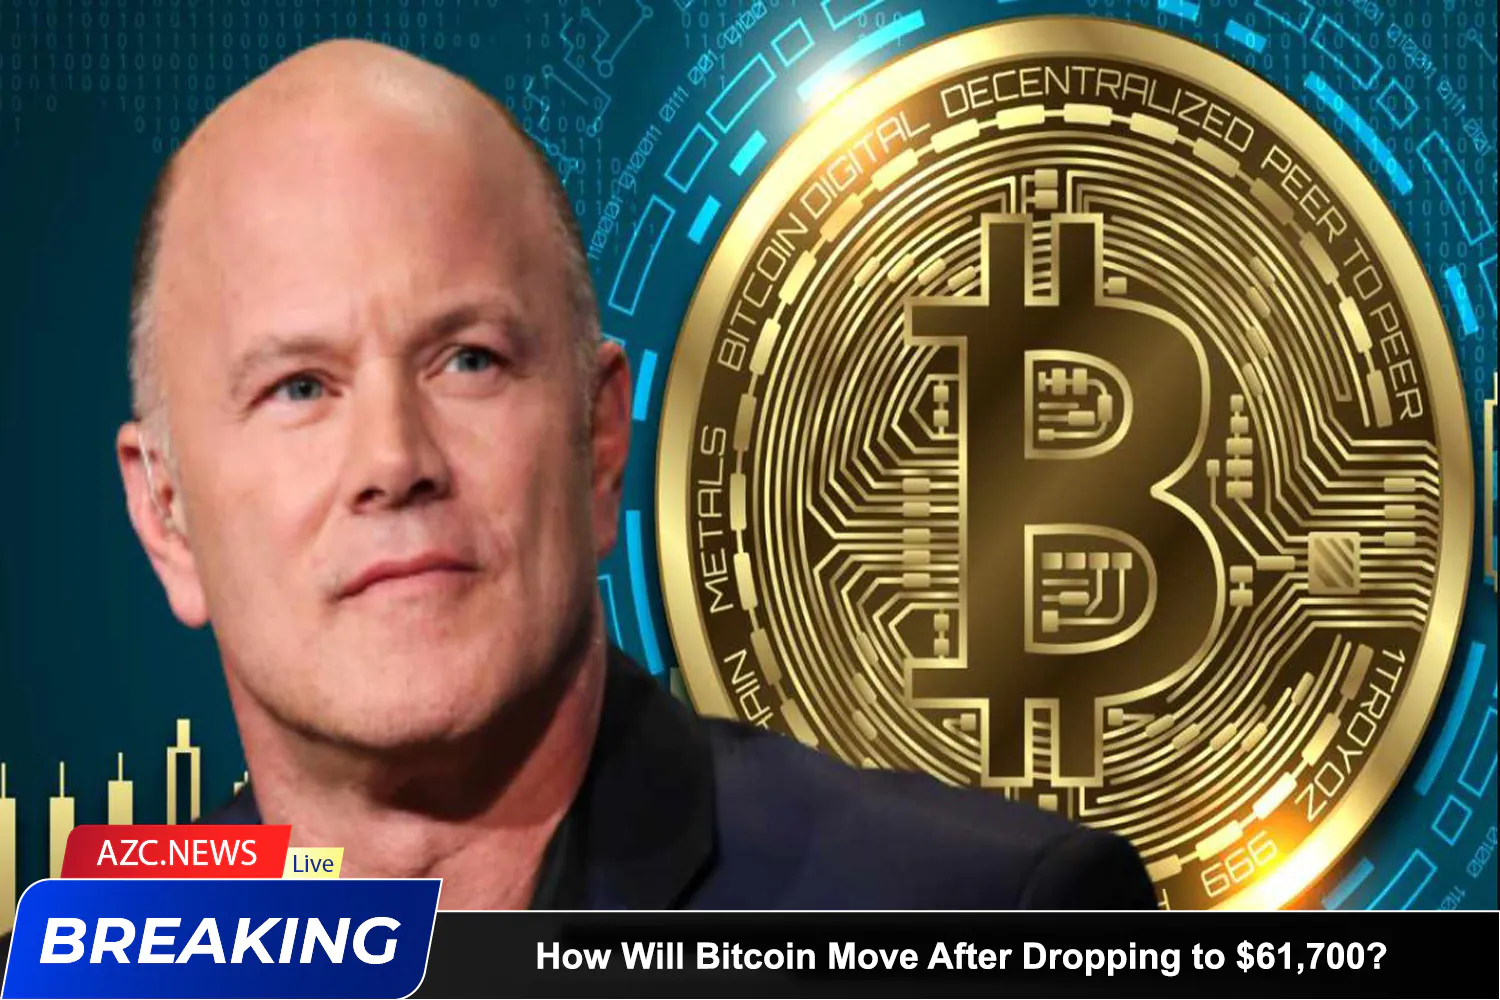 Azcnews How Will Bitcoin Move After Dropping To $61,700